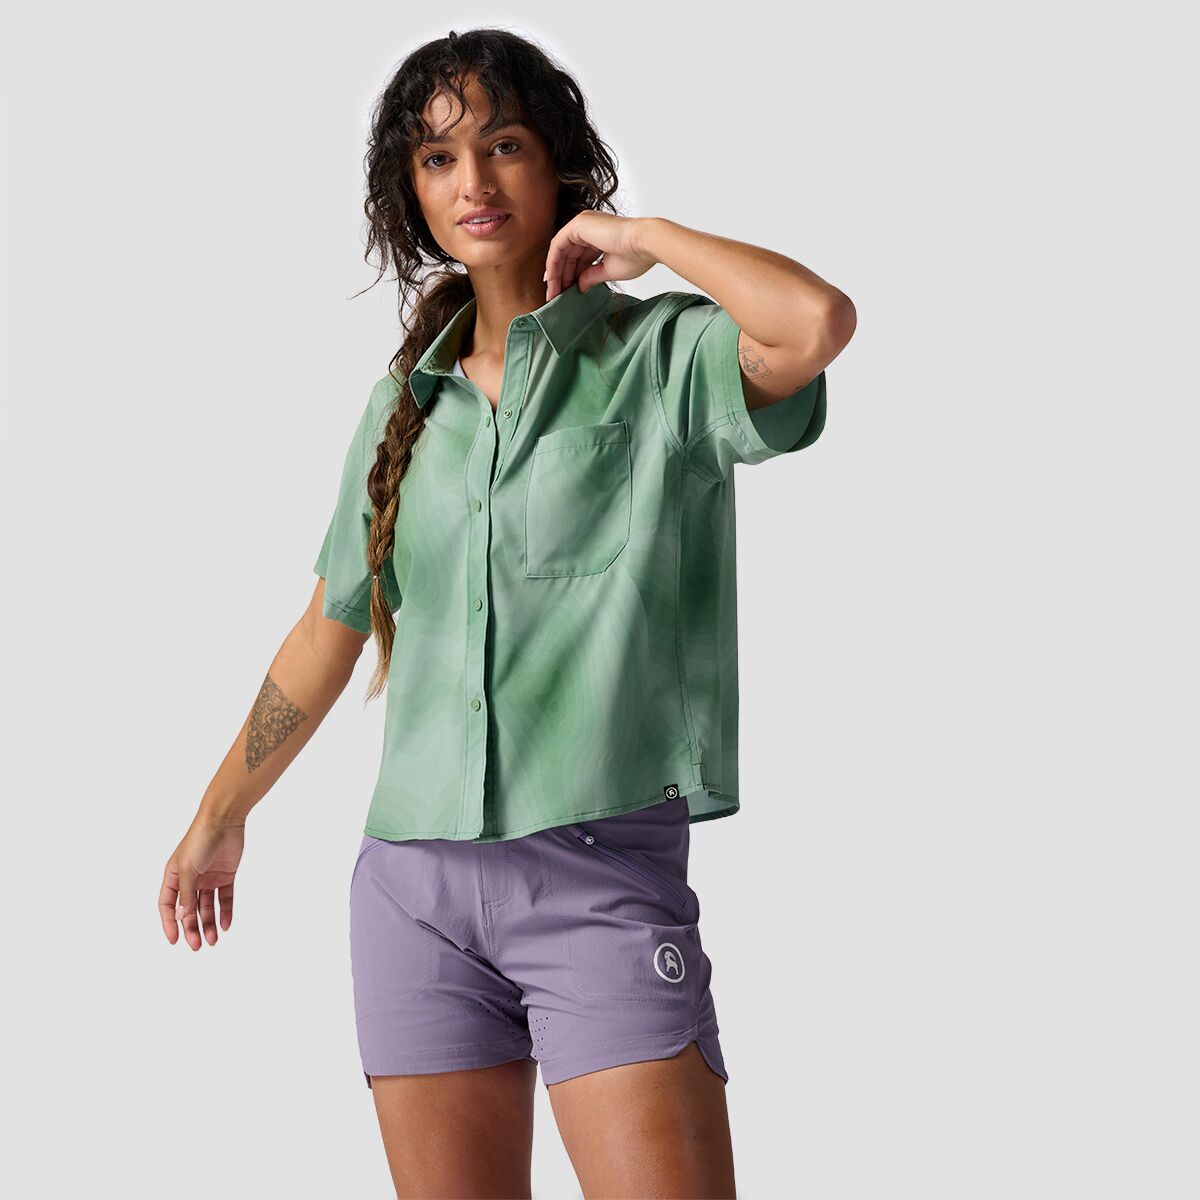 Backcountry Button-Up MTB Jersey - Women's